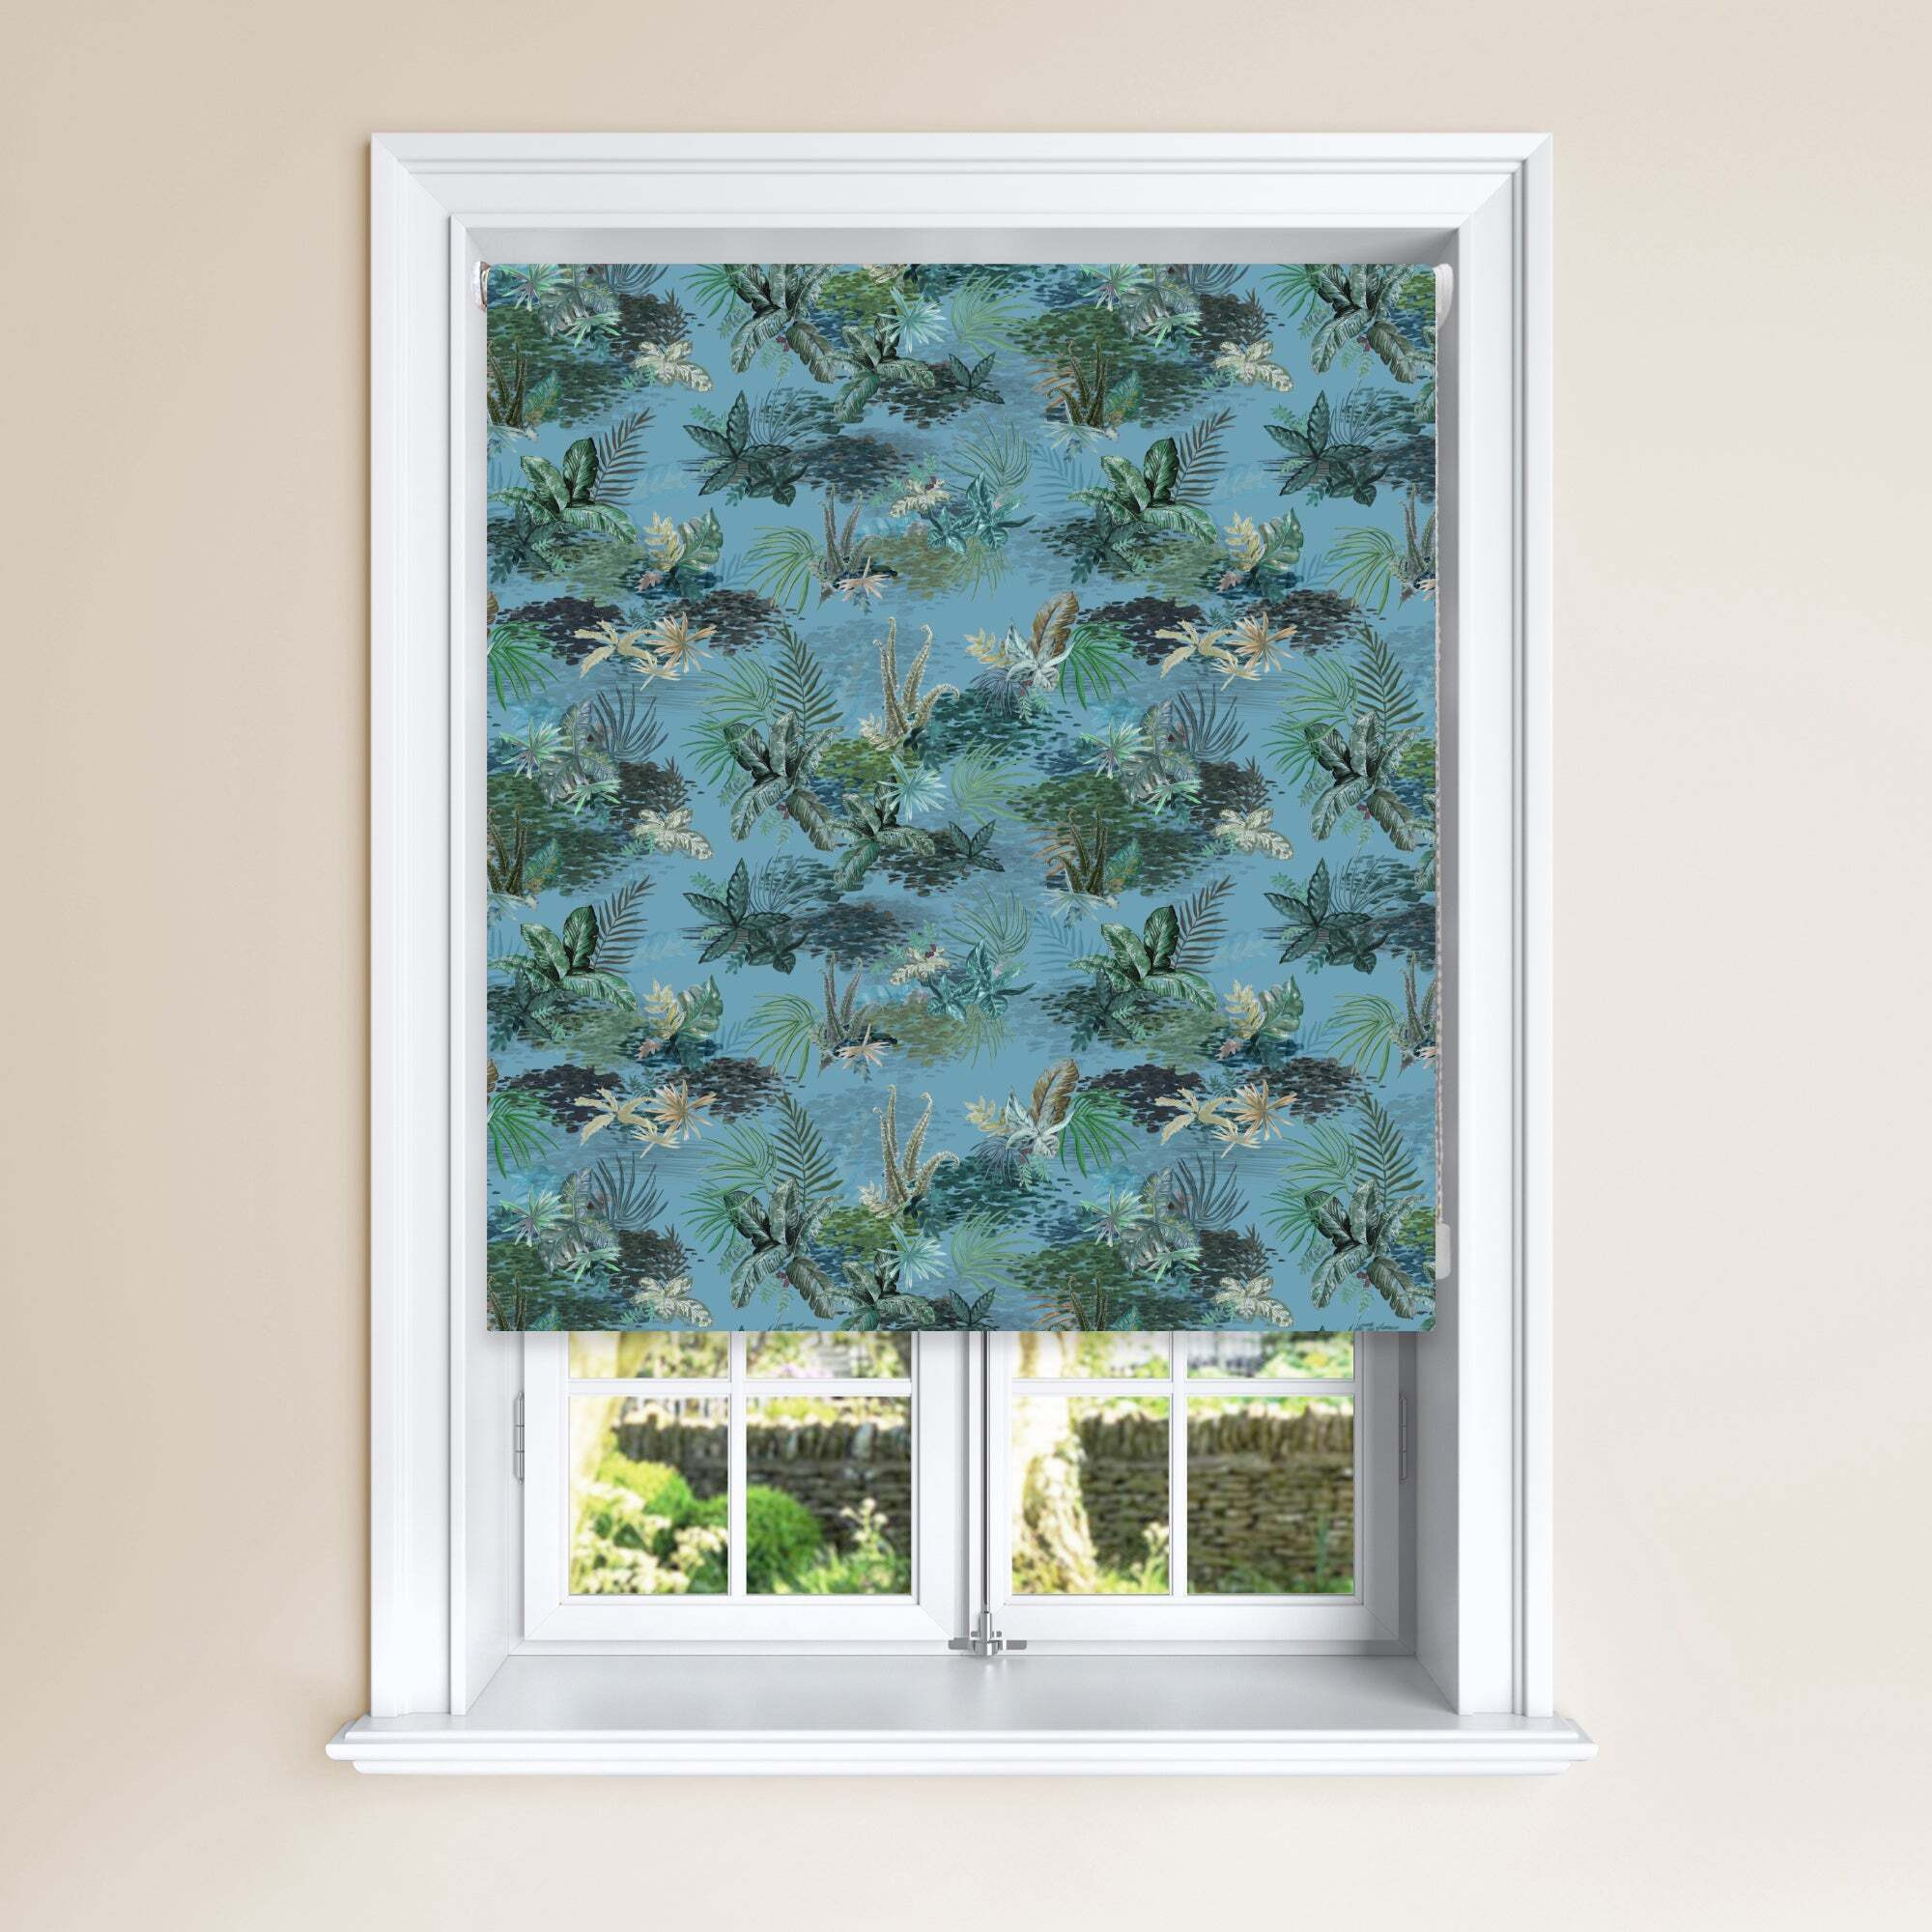 Periwinkle Jungle Blackout Roller Blind Blue, Green and White